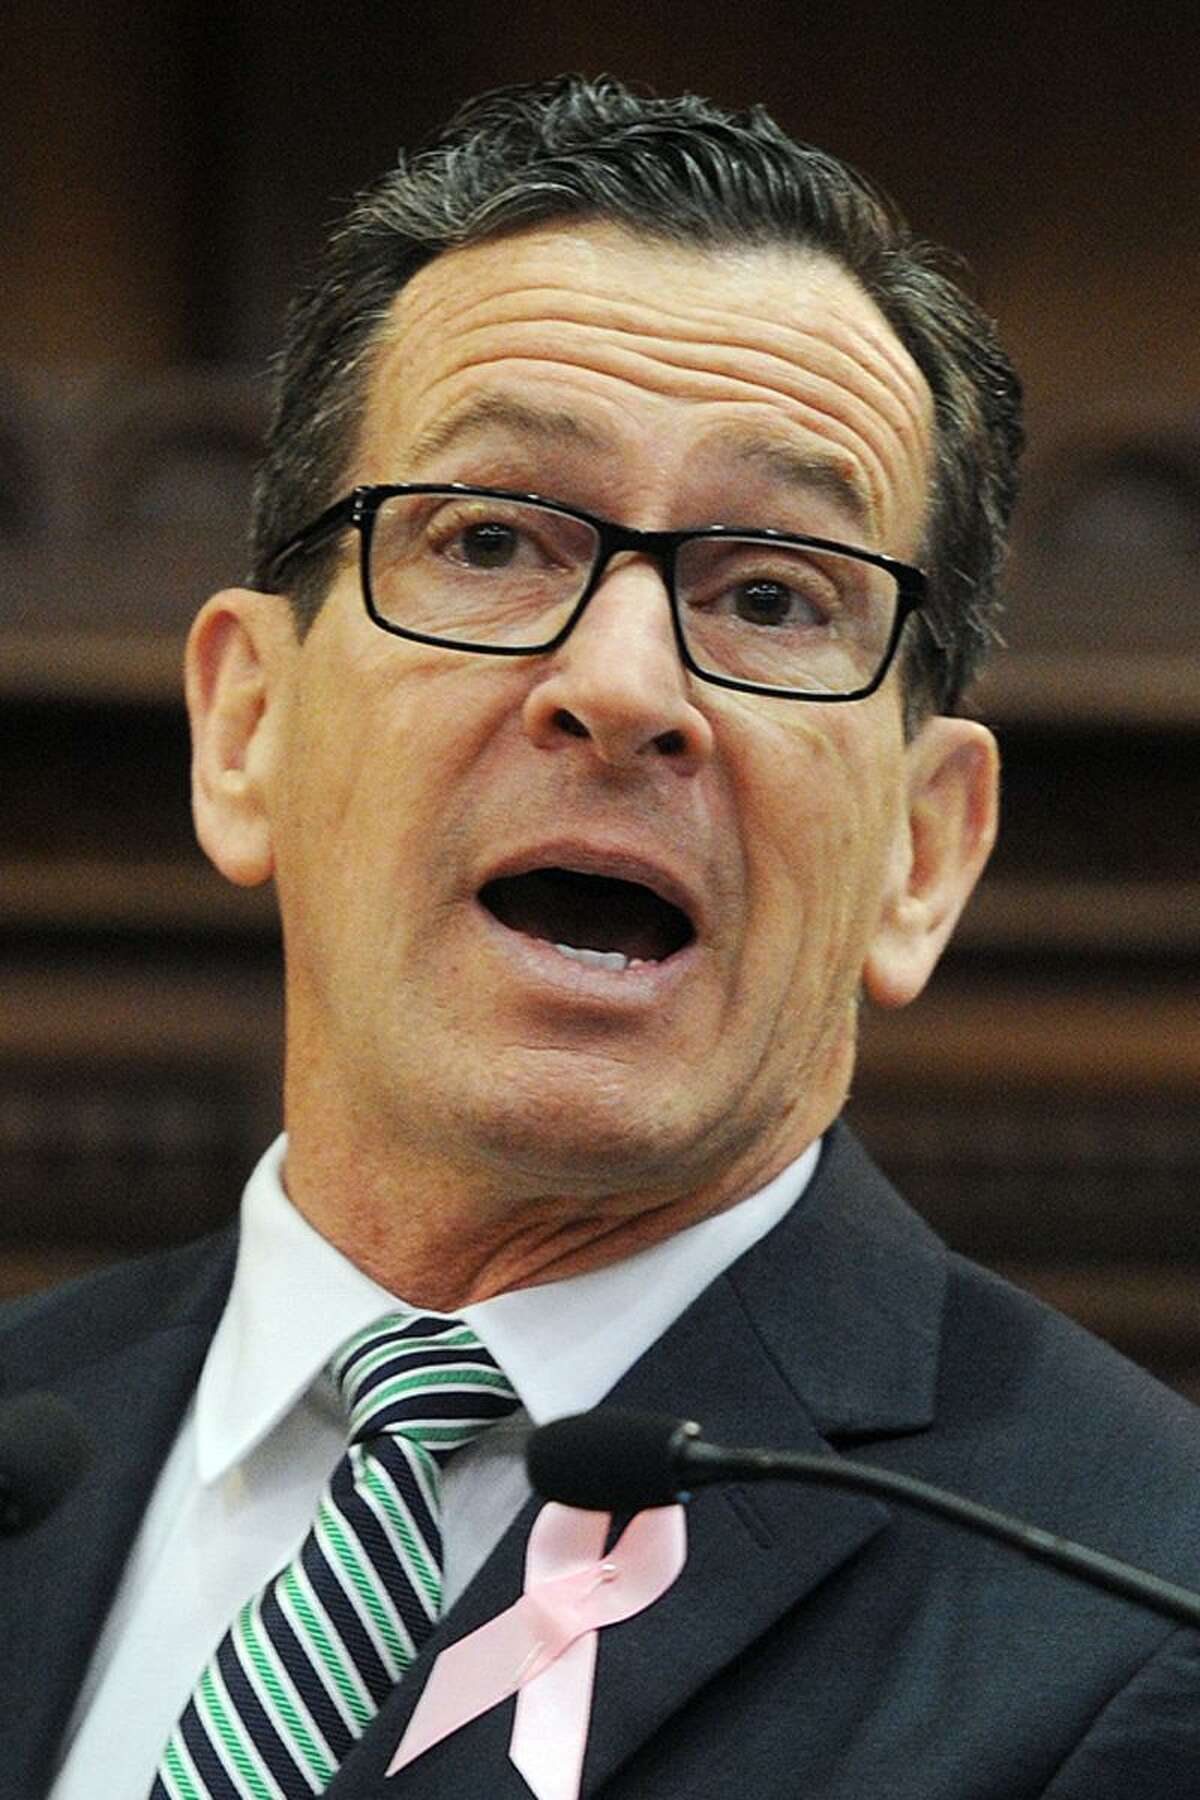 Connecticut Gov. Dannel P. Malloy joined governors in New York, New Jersey and Rhode Island to form a new task force to work on gun control, share information and track weapons.